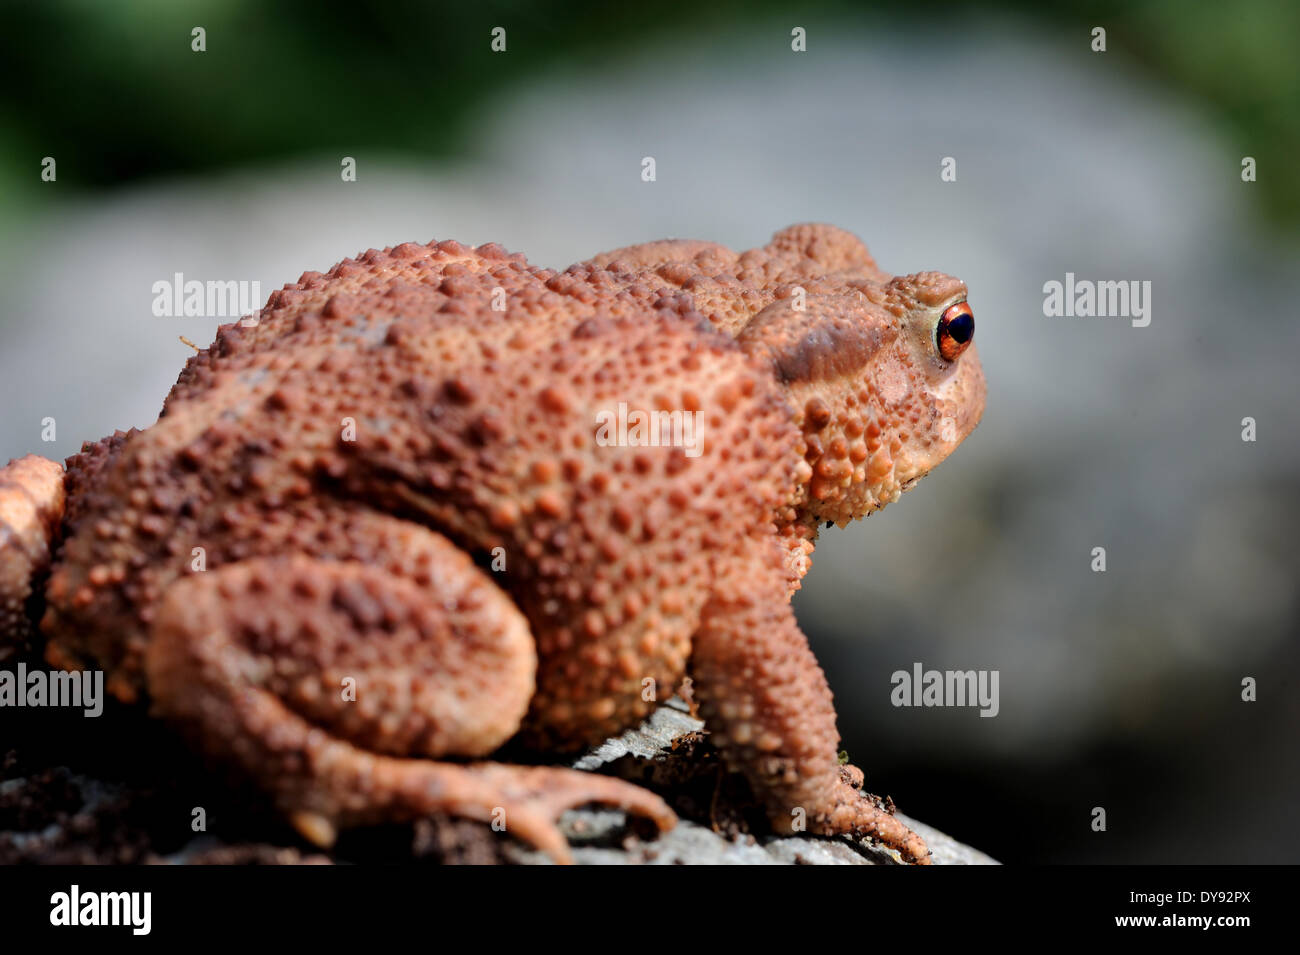 European toad, Bufo bufo, Amphibian, toad, Amphibians, toads, frogs, young, animal, animals, Germany, Europe, Stock Photo